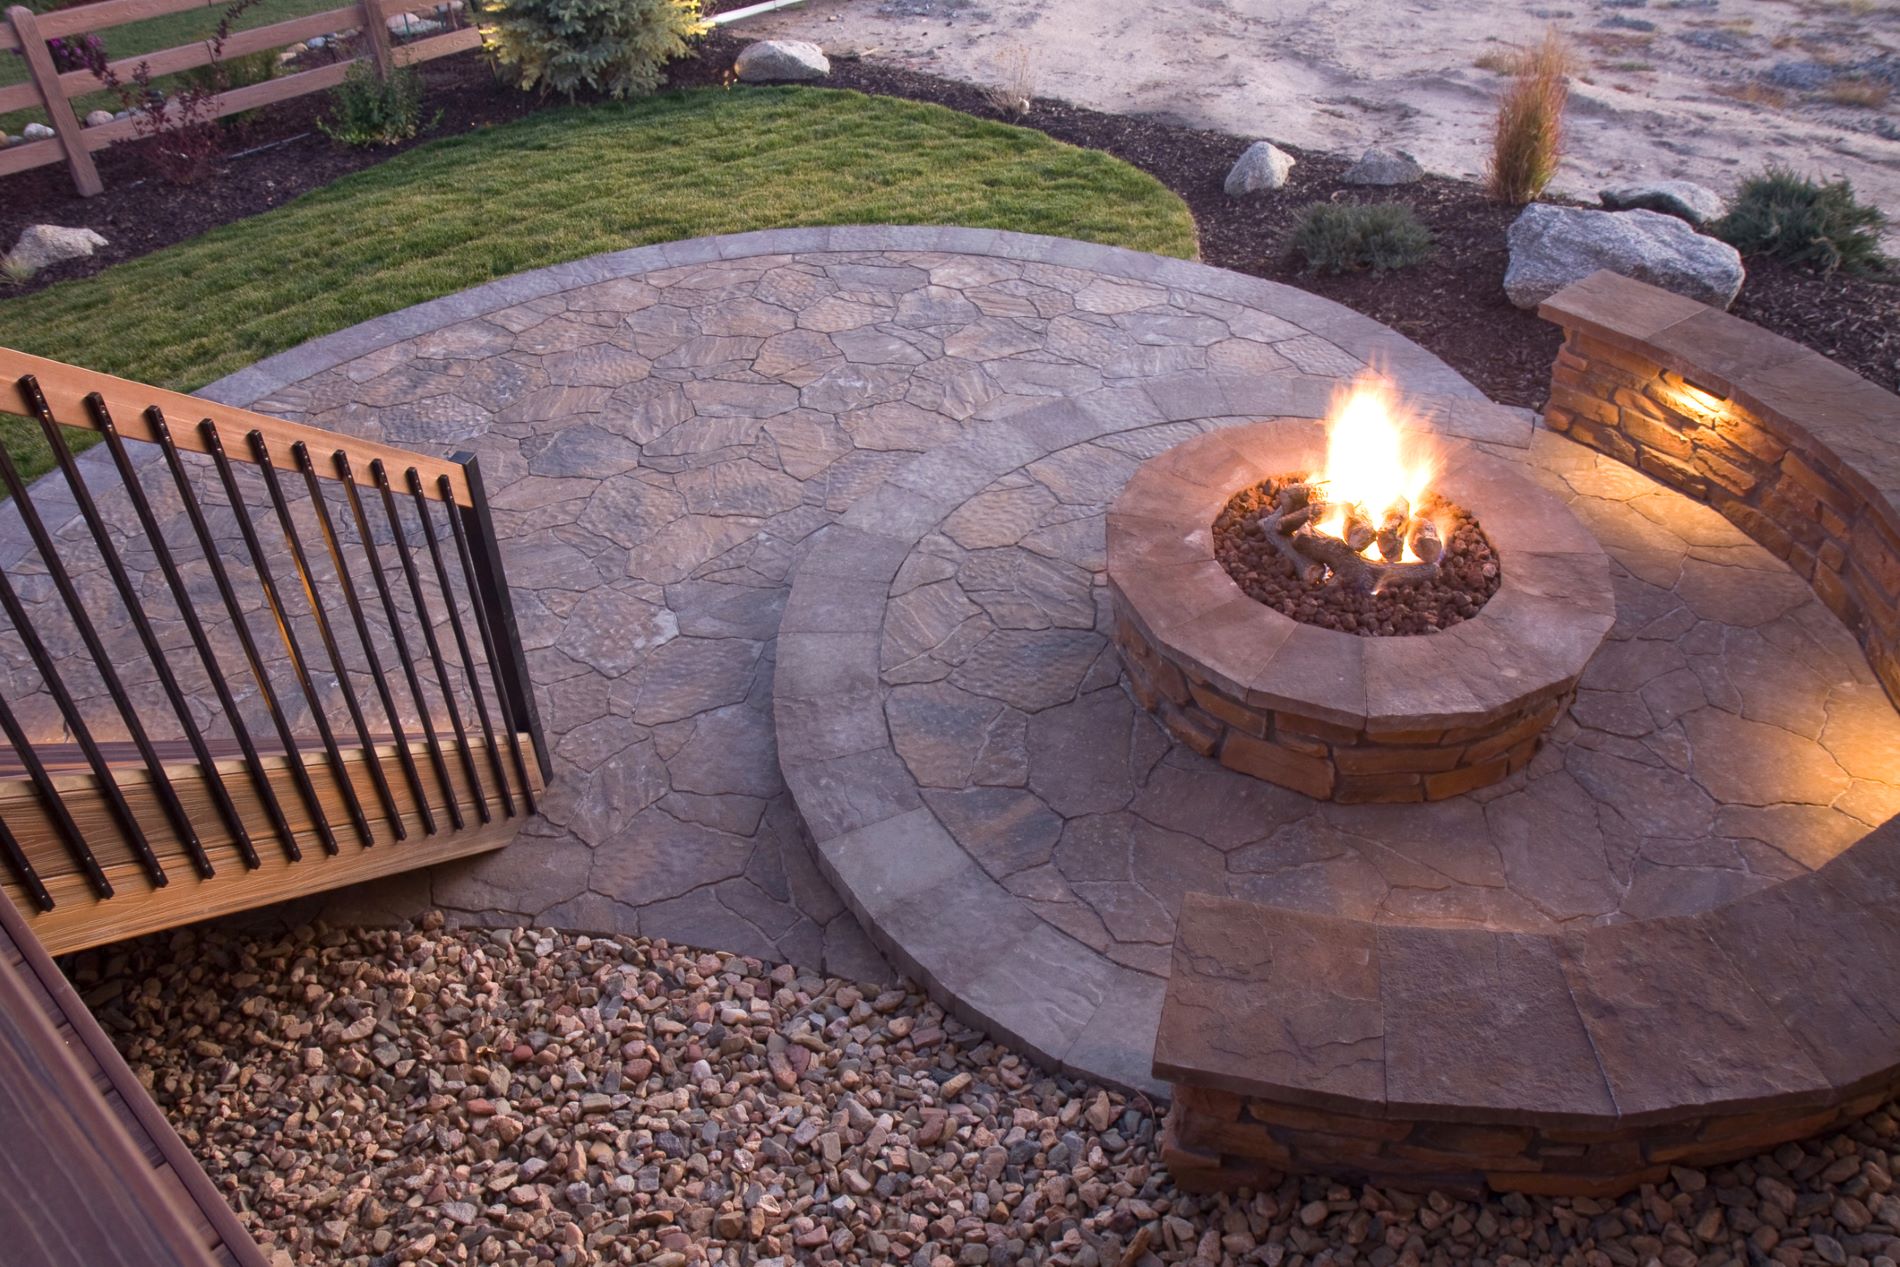 Fire pit patio - by using recycled patio materials the only limit is your imagination